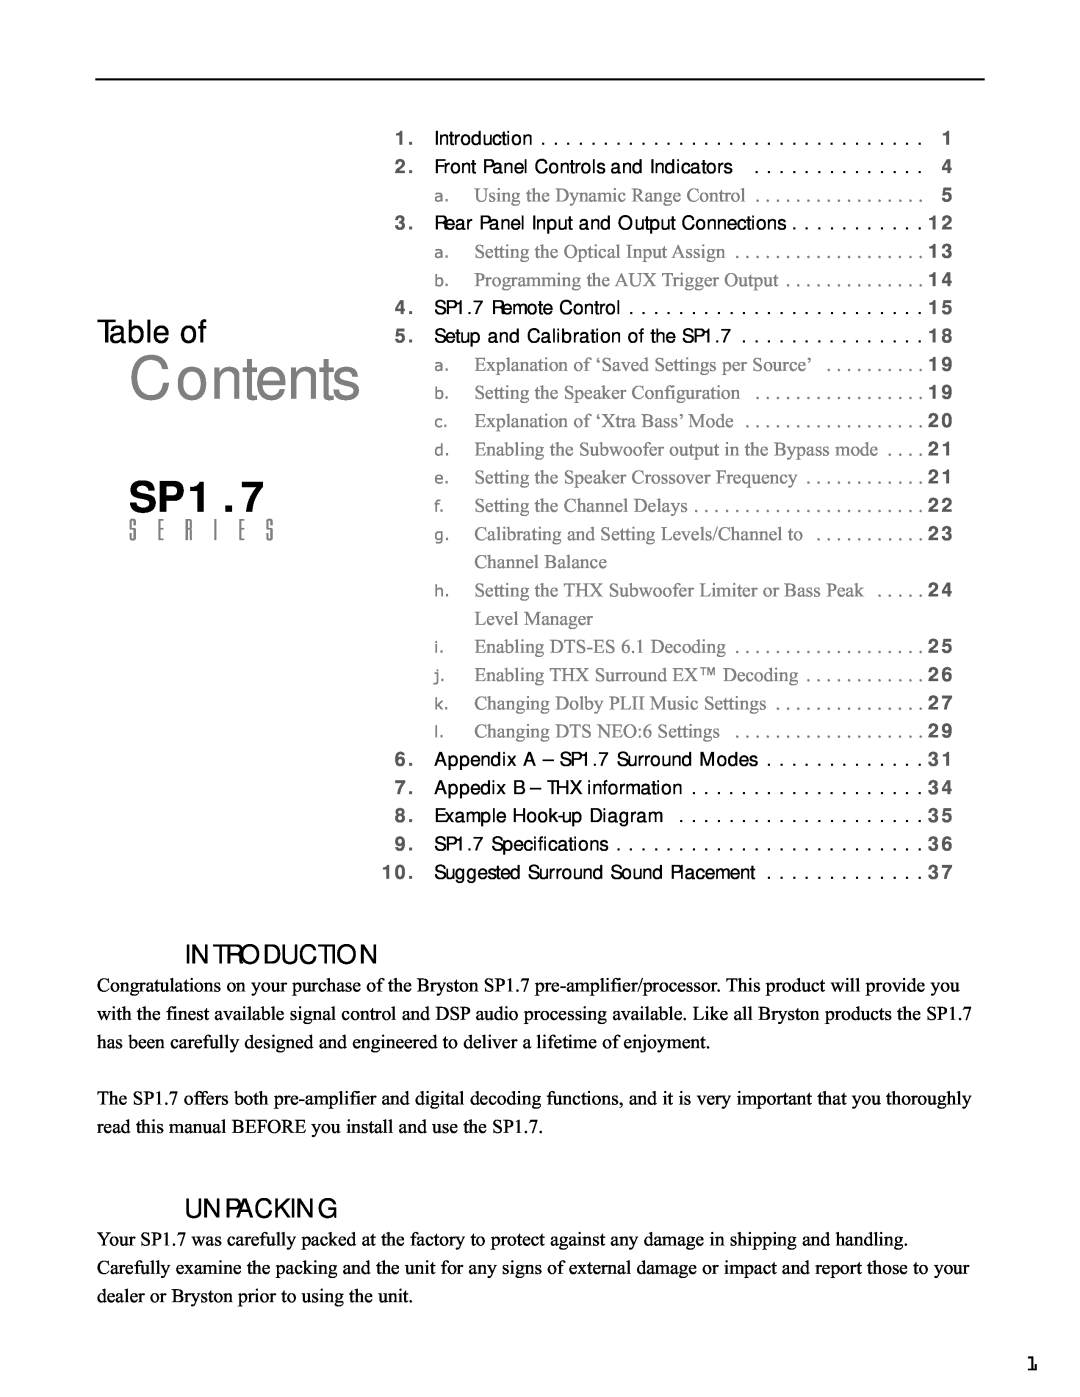 Bryston SP1.7 manual Introduction, Unpacking, Contents, Table of, S E R I E S 